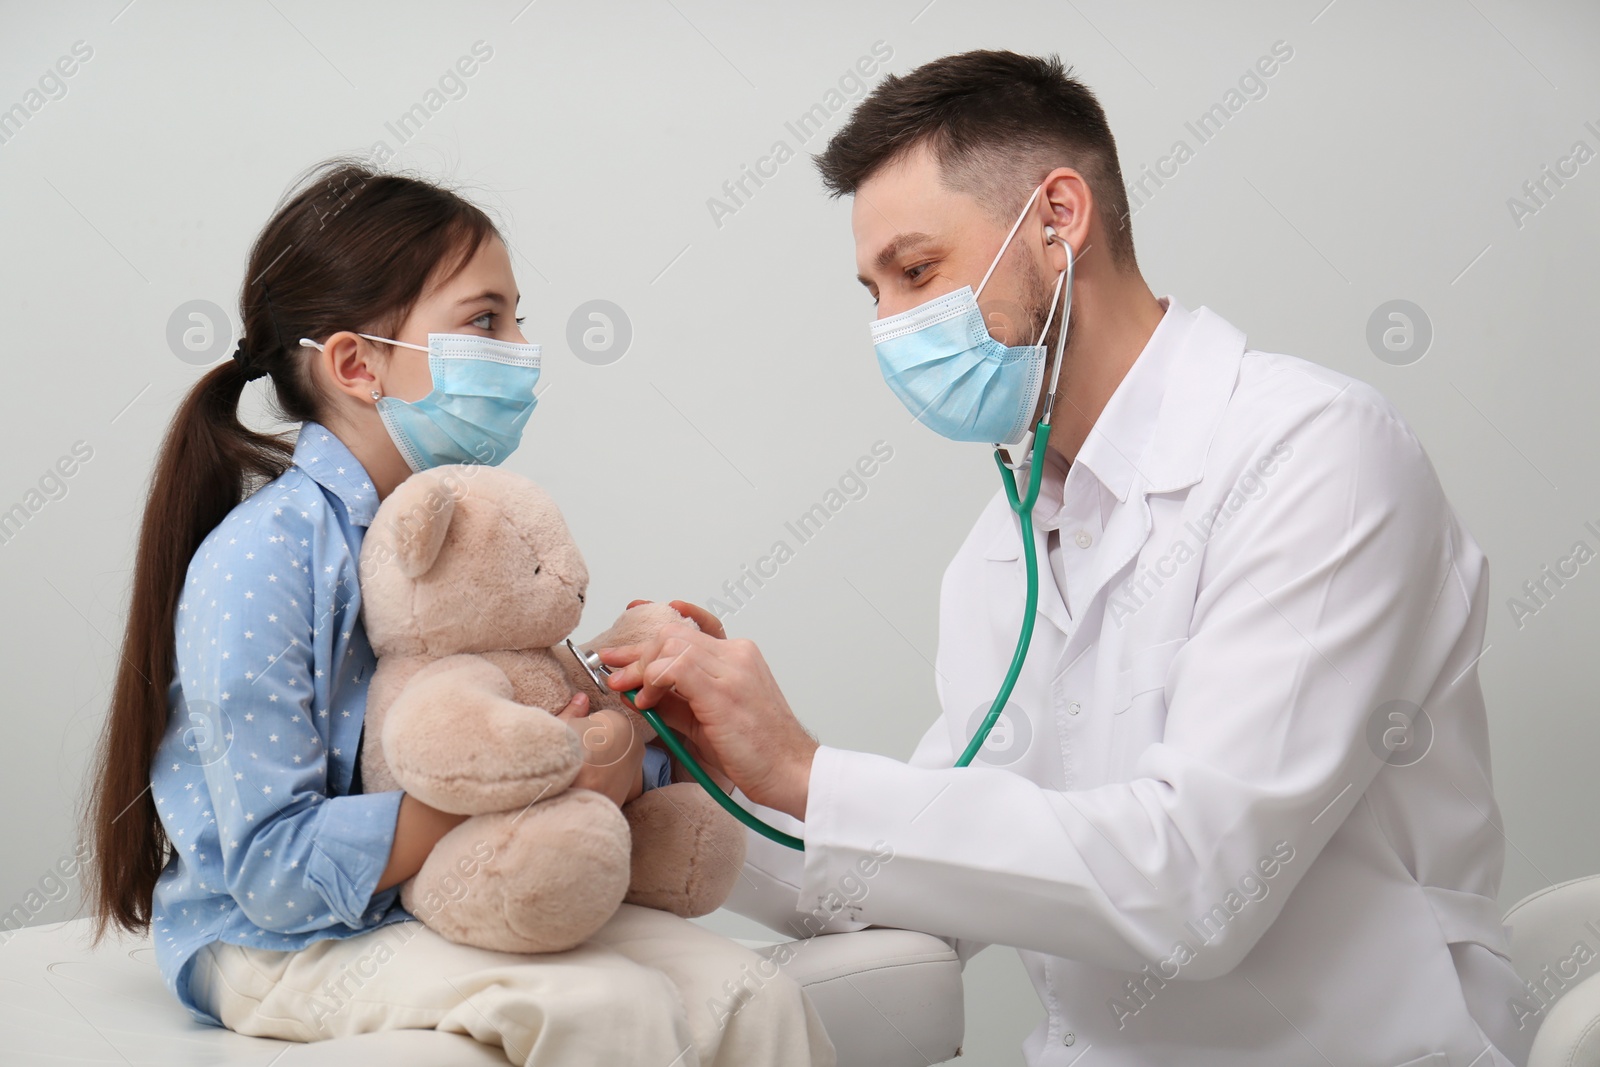 Photo of Pediatrician playing with little girl during visit in hospital. Doctor and patient wearing protective masks